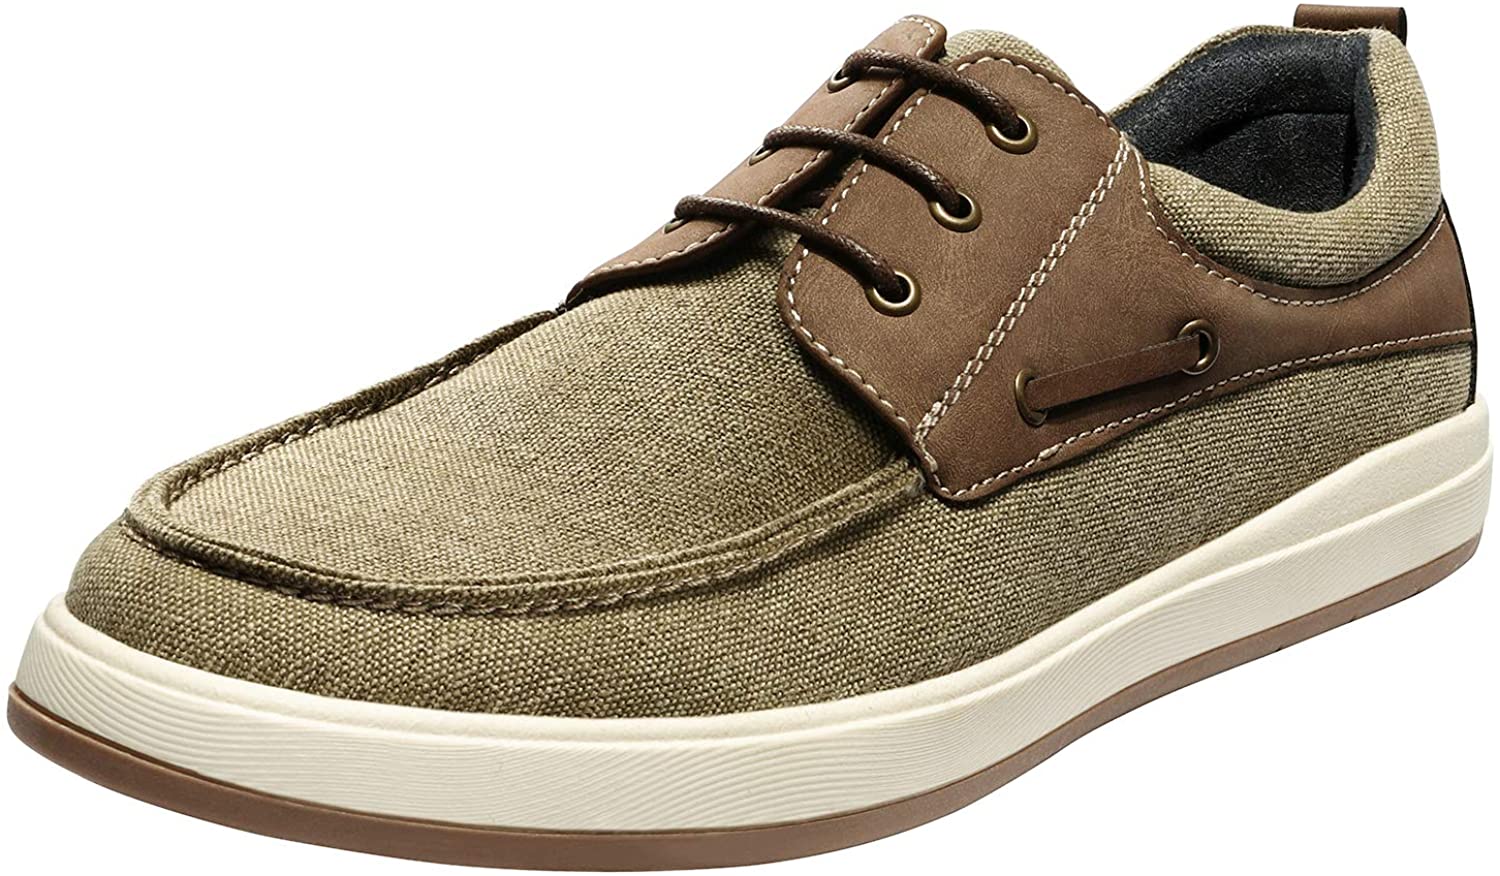 Bruno Marc Men's Canvas Boat Shoe Lace Up Fashion Casual Sneakers